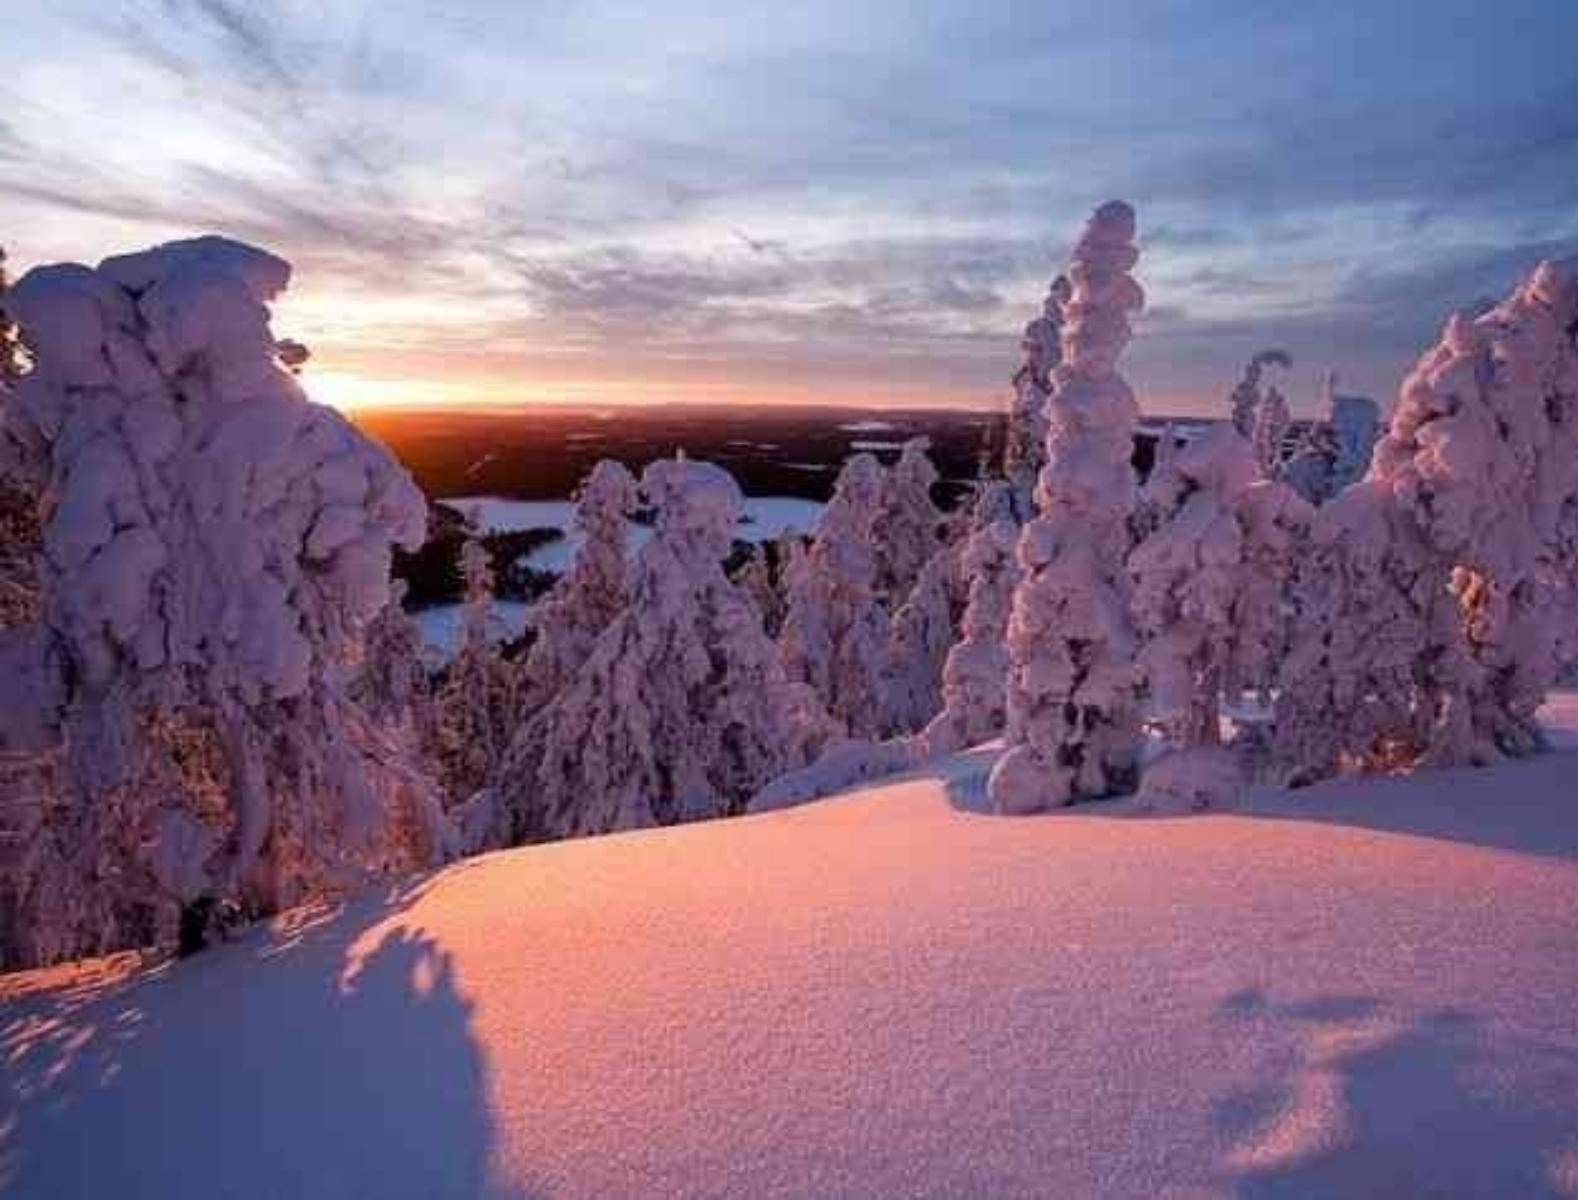 1. The ‘Finnish Lapland‘ where the trees look like snow covered